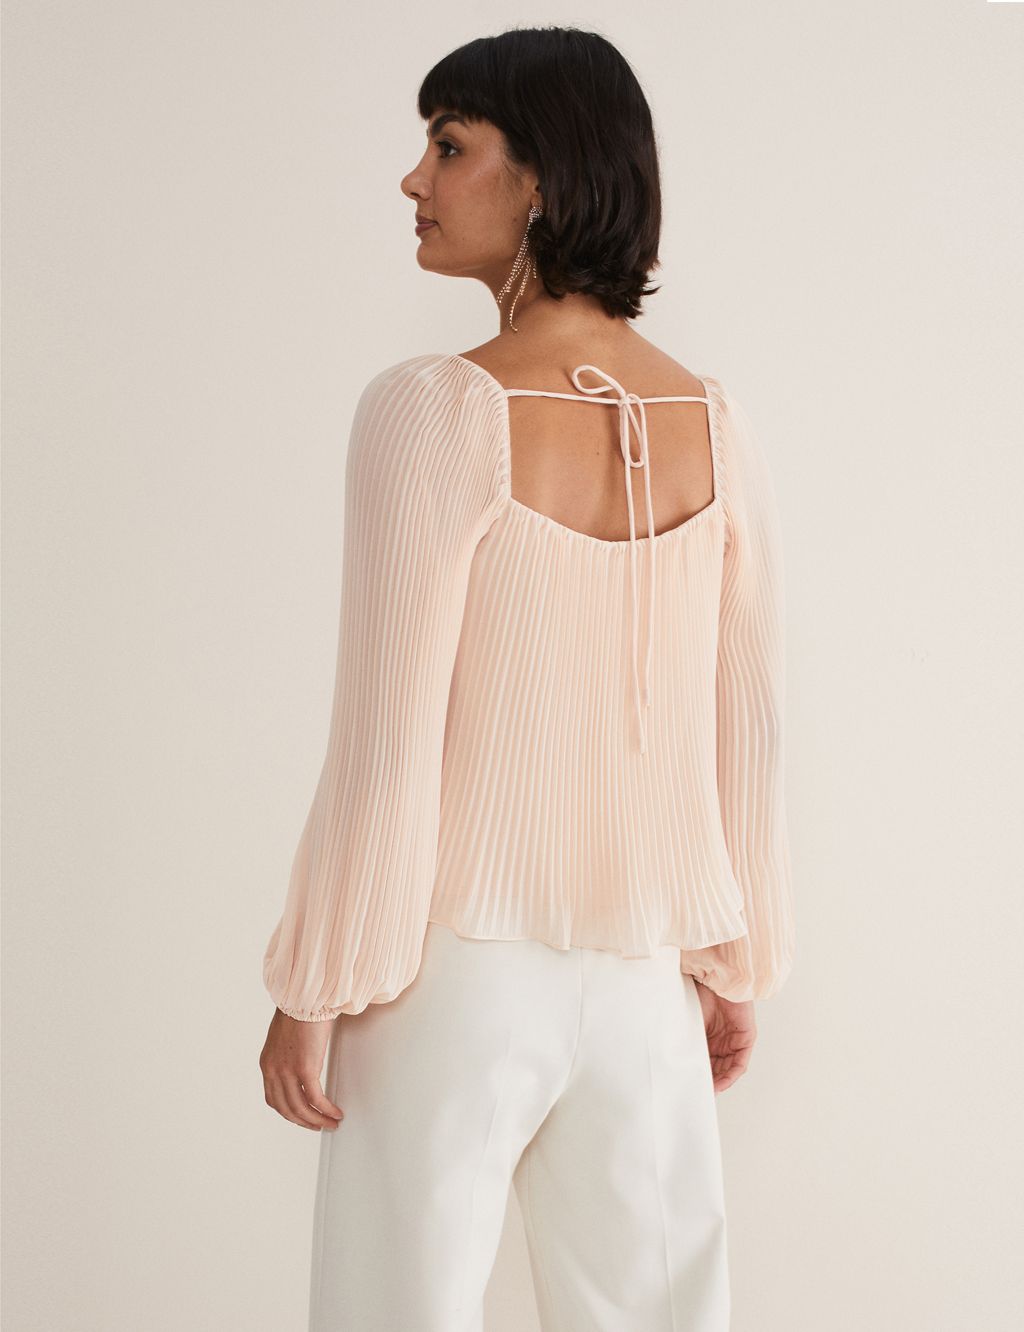 Pleated Square Neck Top image 3